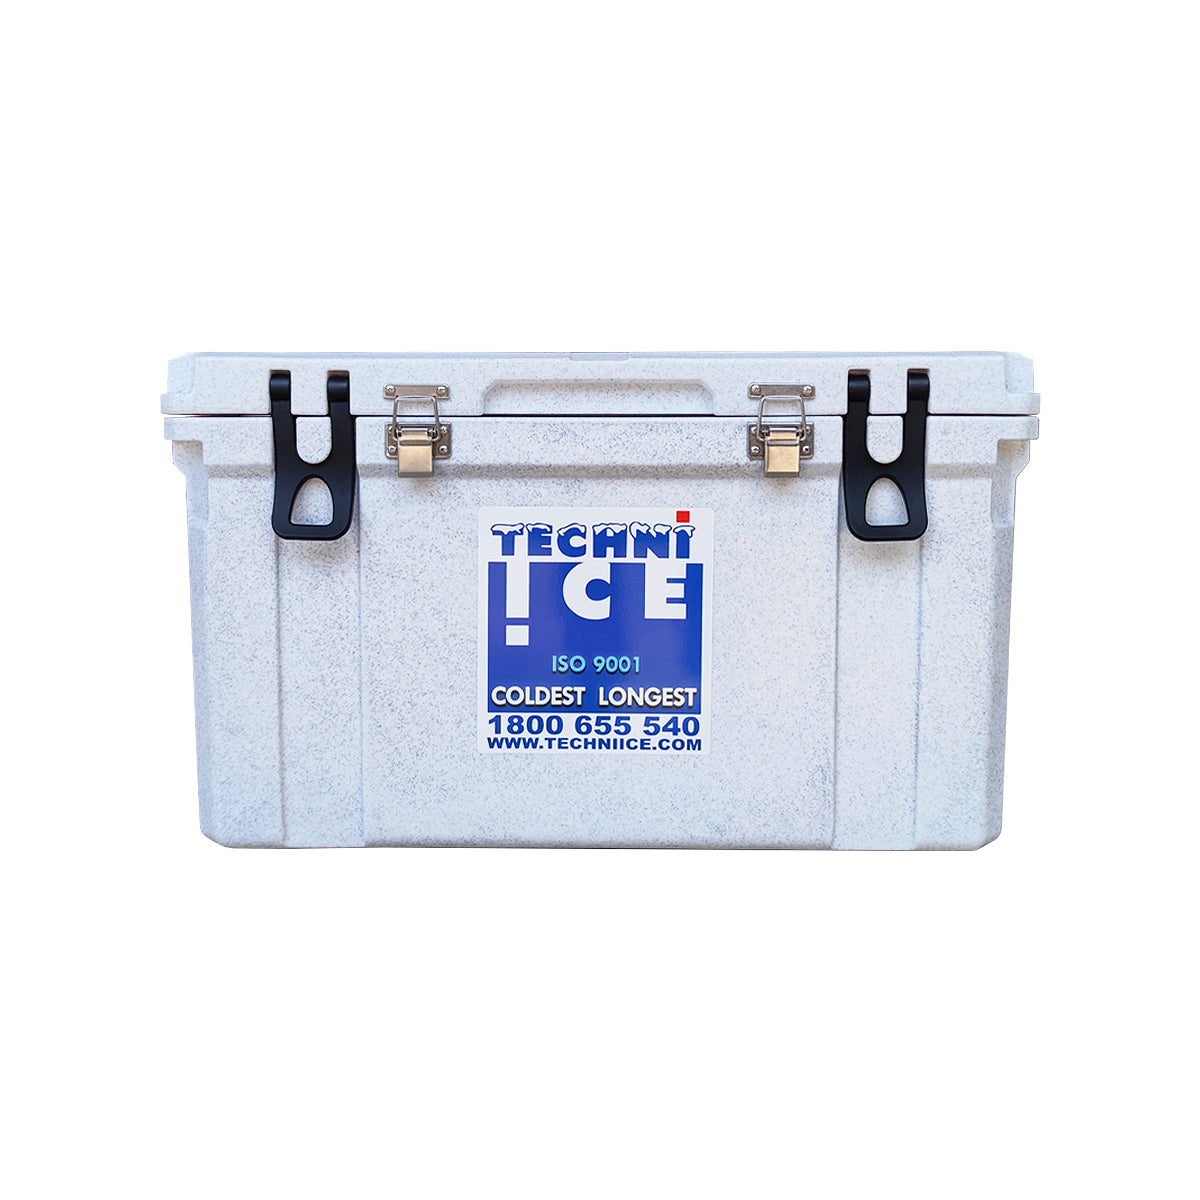 Classic Hardcore Ice Box 45L Marble White *FRESH STOCK JUST ARRIVED *FREE 6 REUSABLE DRY ICE PACKS VALUES $32.95